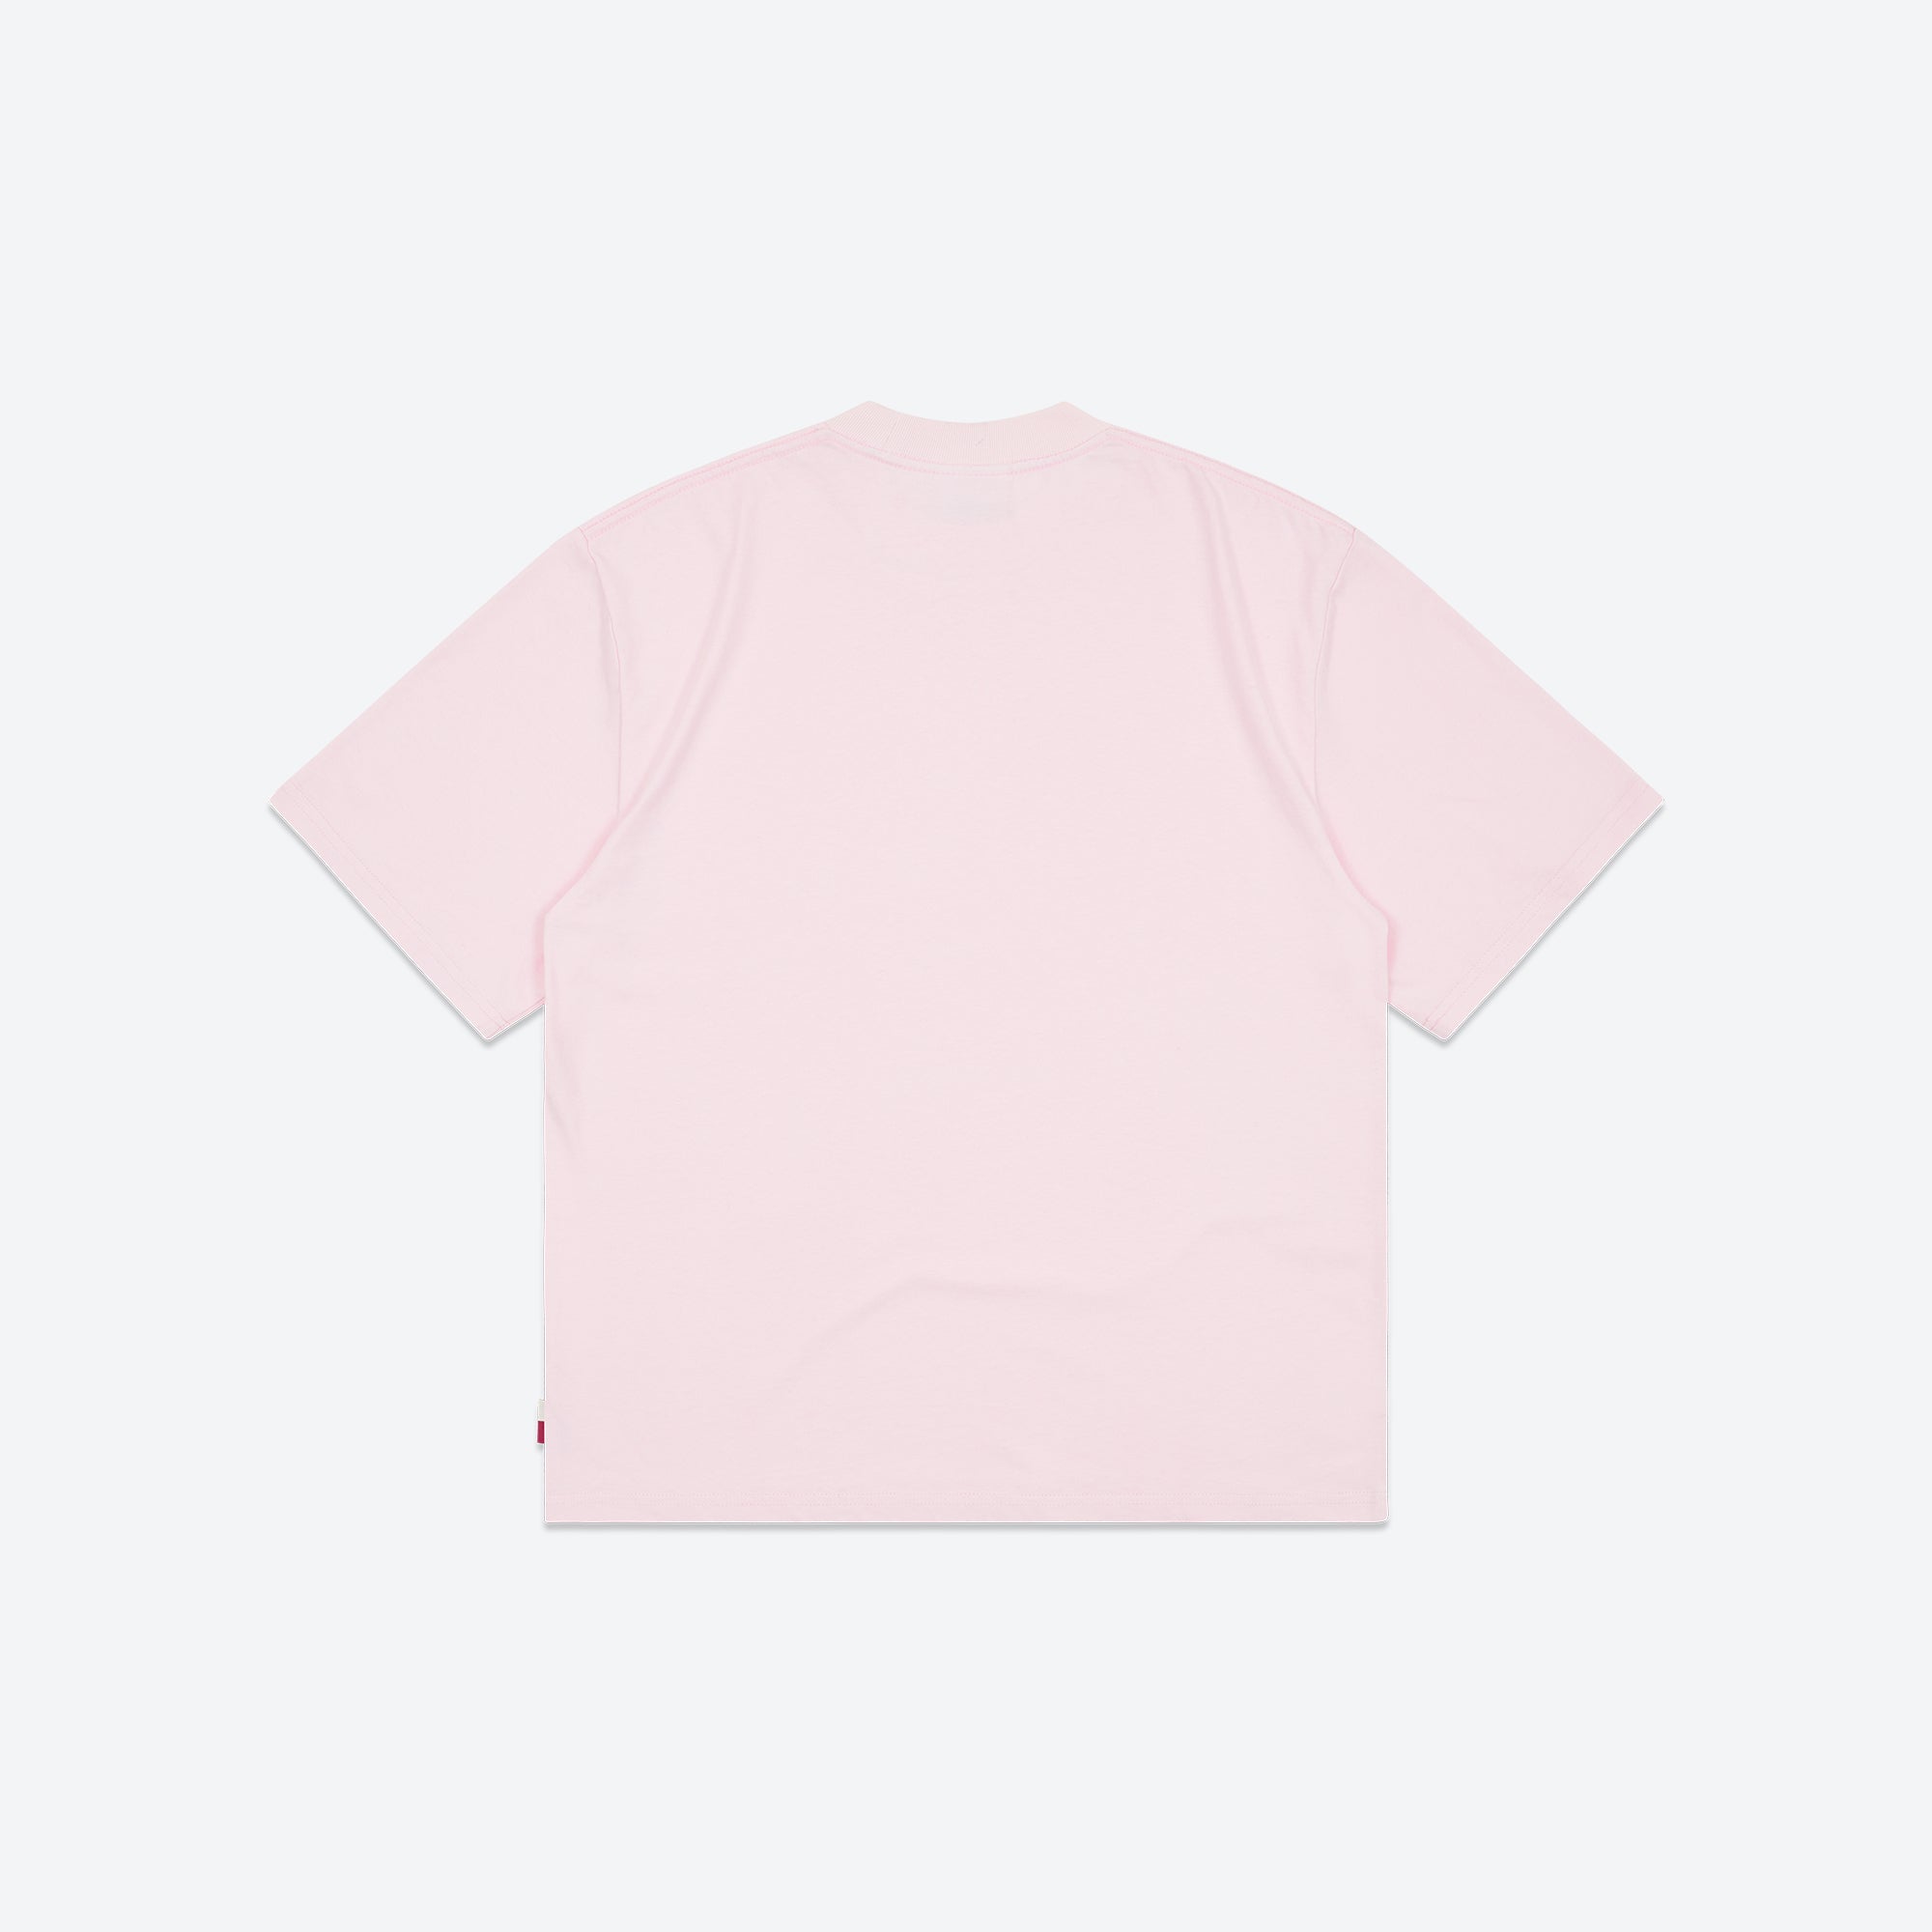 Alfred's Apartment - Trusted Tee - Washed Pink